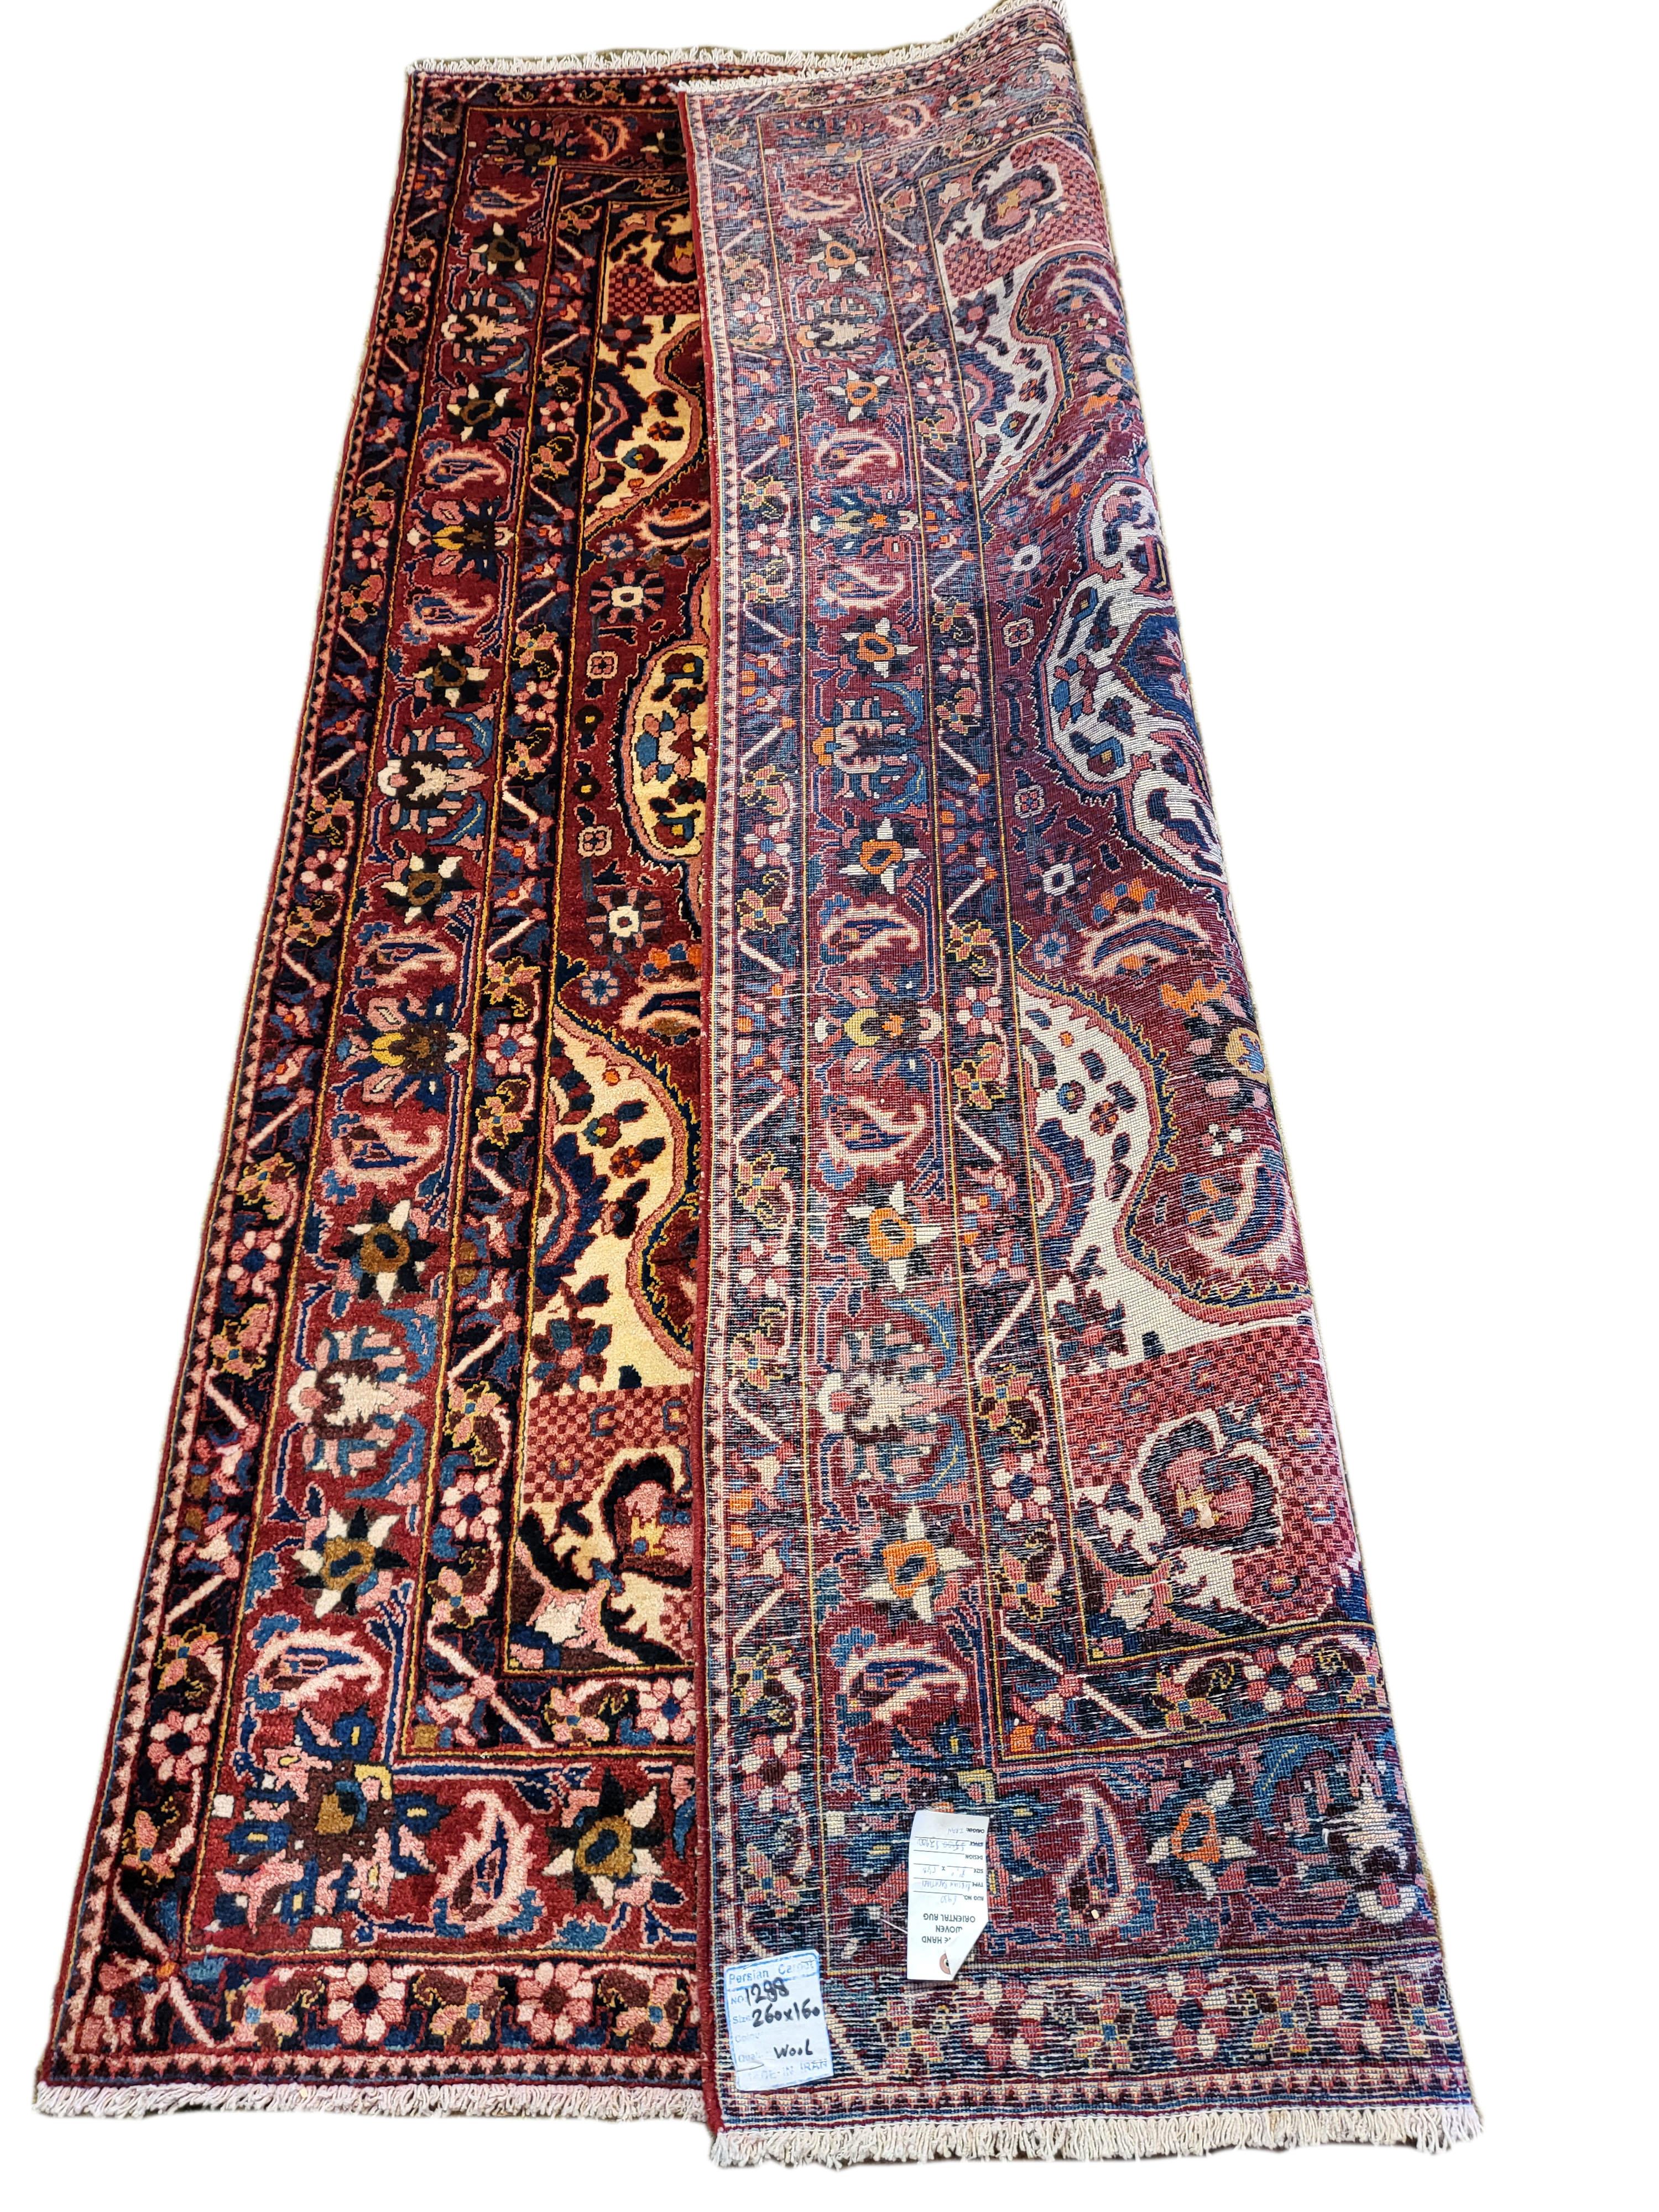 Exceptional 5' x 8.5' 60's Bakhtiari. Bakhtiaris are known for there sharp contrasting designs and this rug is no exception. This is a particularly tight woven Bakhtiari featuring a very fine wool. Due to the quality of the wool this rugs is very